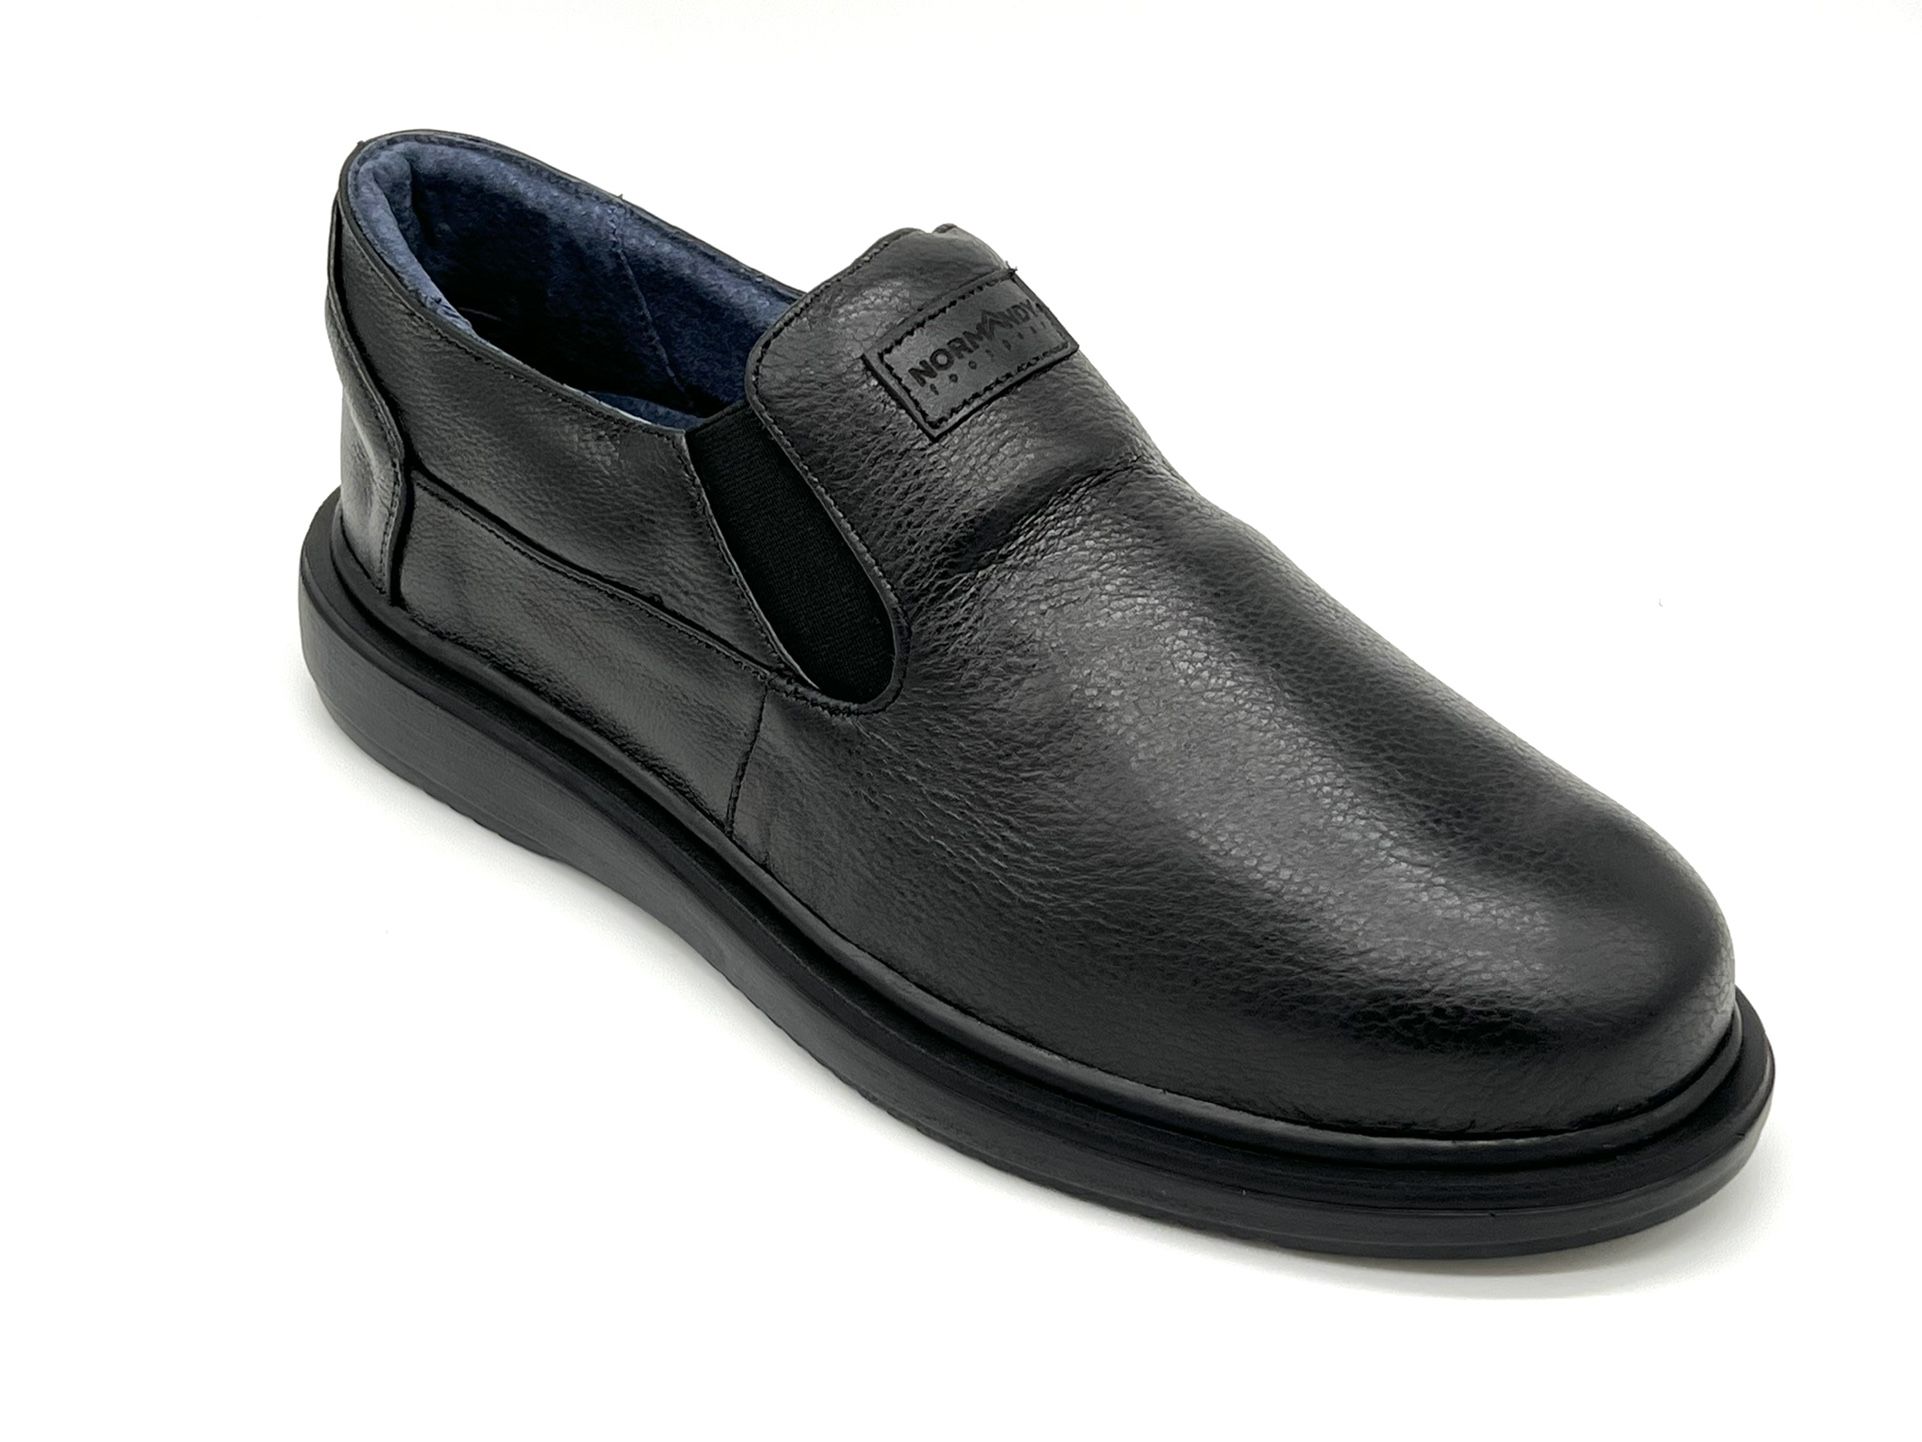 Restaurant Shoes Fullgrain Leather Super Confort And Support